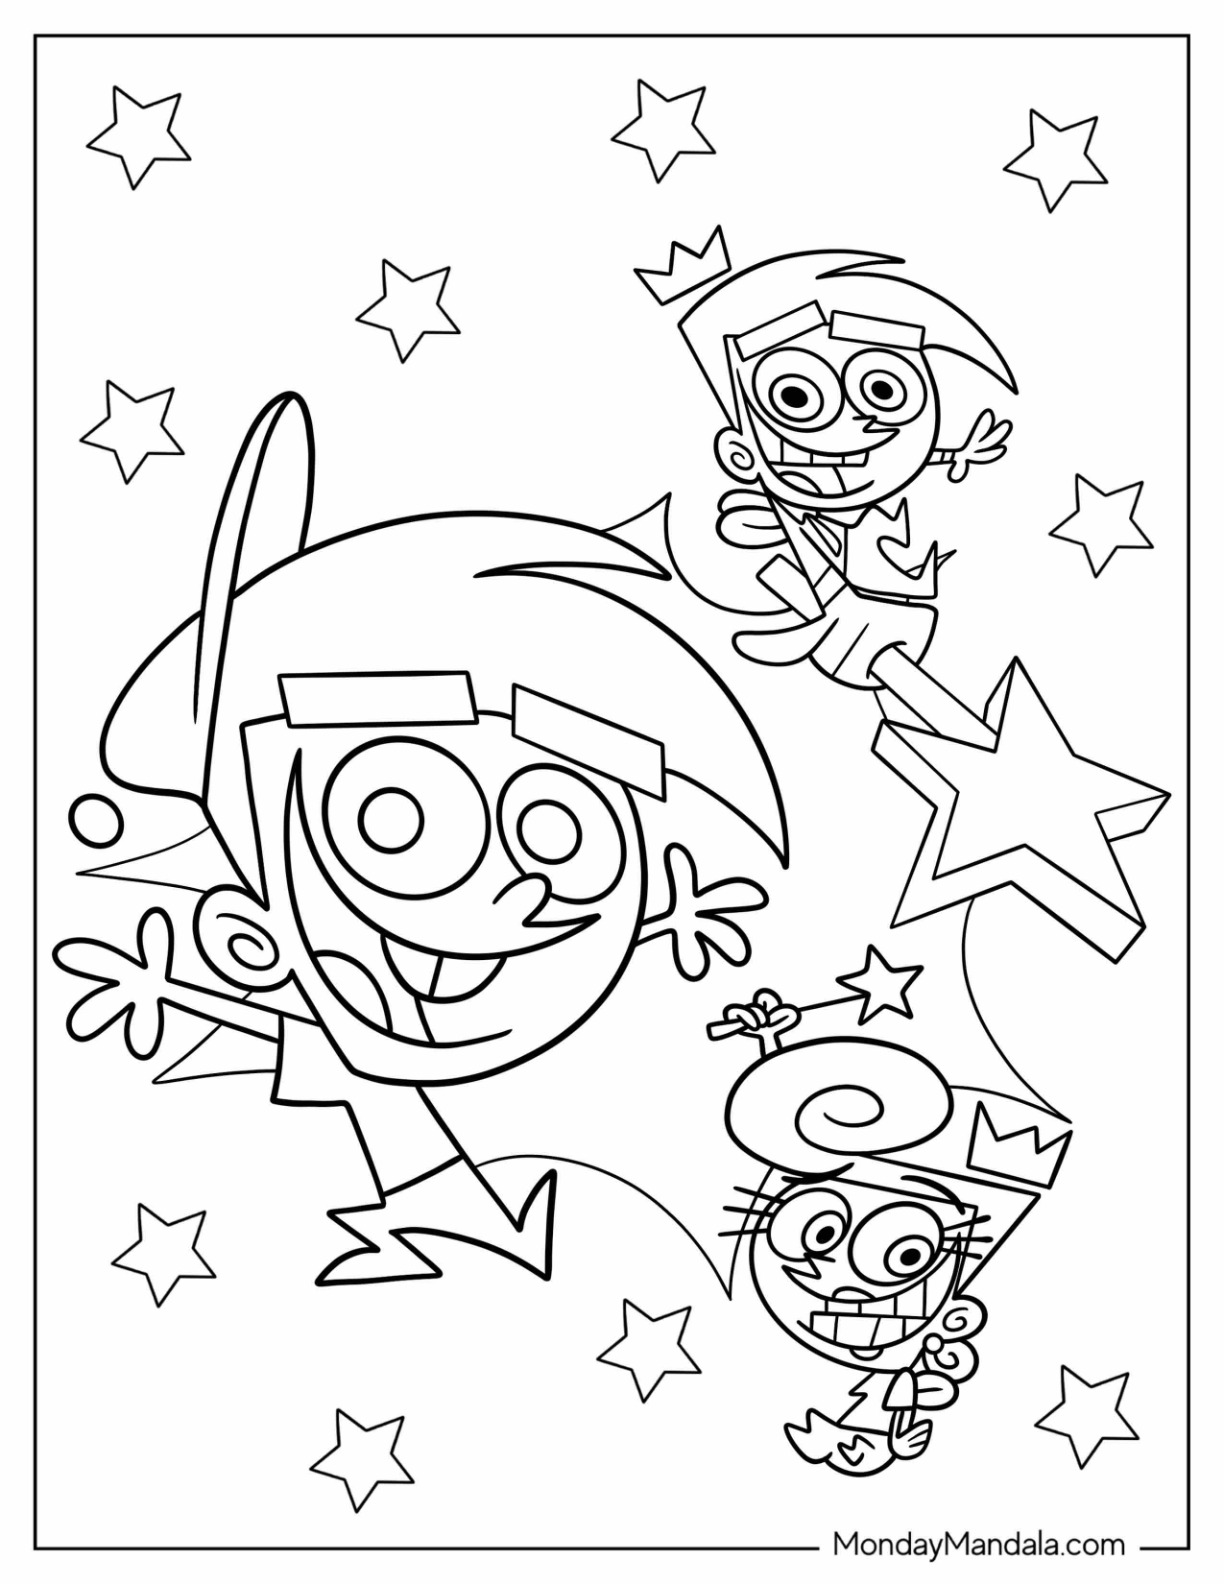 Nickelodeon coloring pages free pdf printables